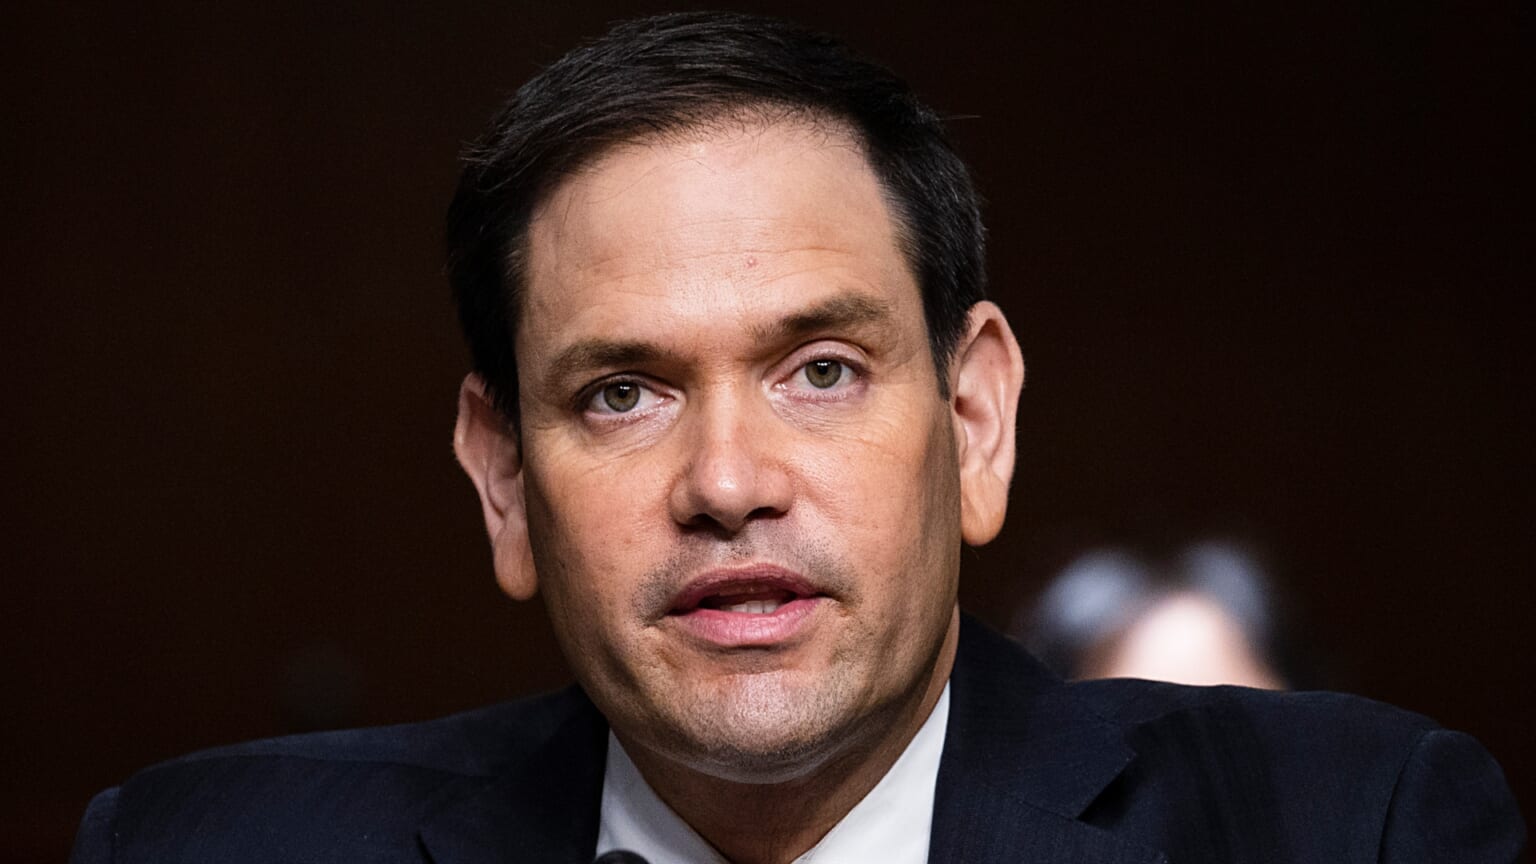 Marco Rubio dragged for Fauci dig after being one of the firsts to get vaccine